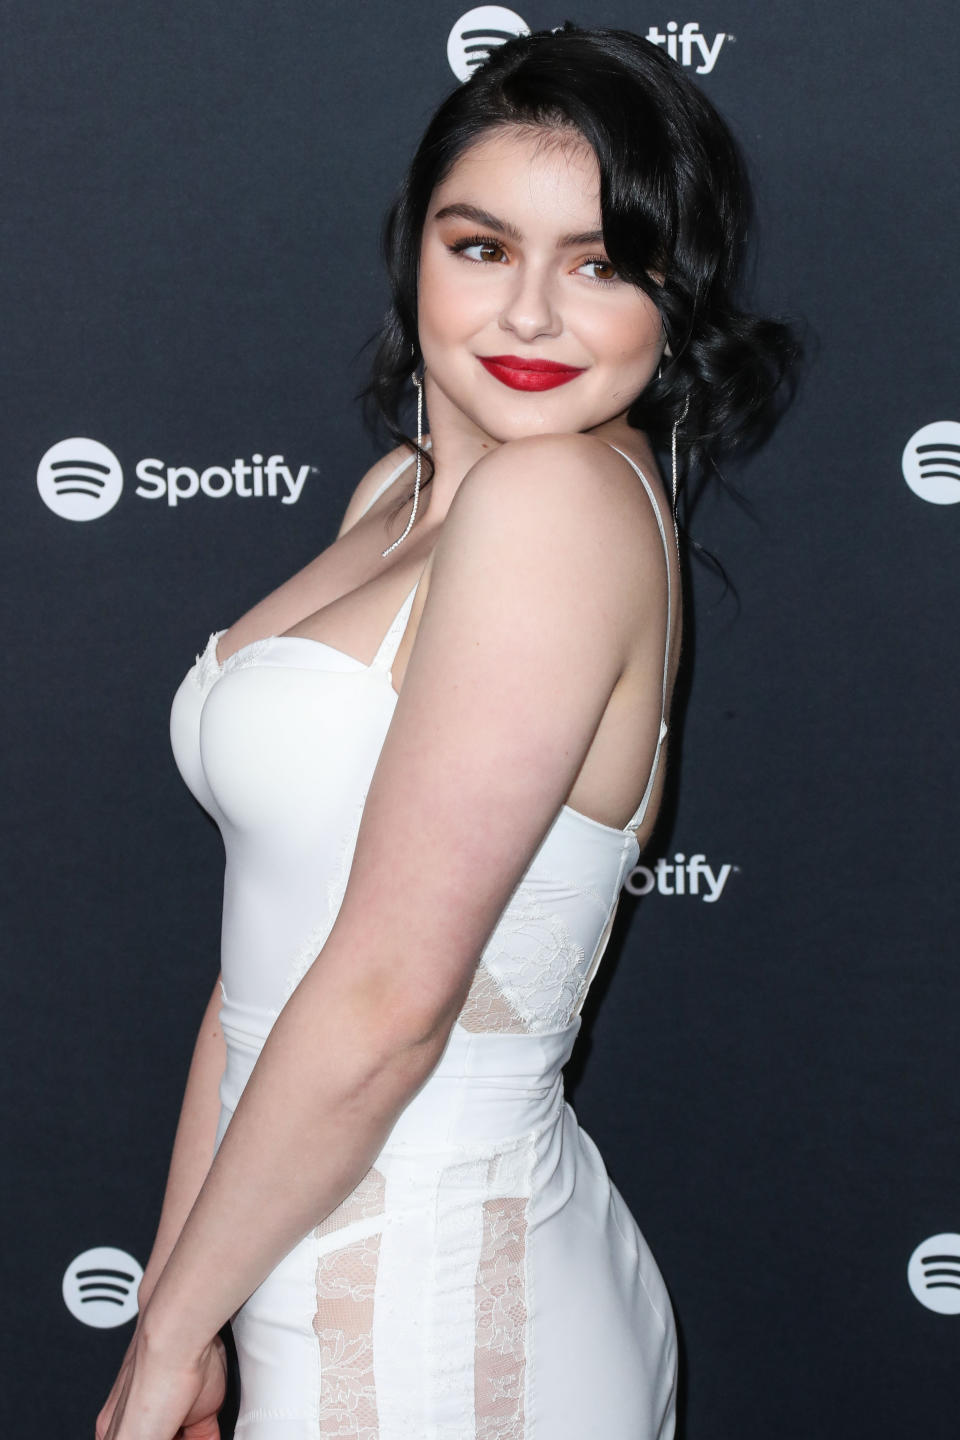 WEST HOLLYWOOD, LOS ANGELES, CALIFORNIA, USA - JANUARY 23: Actress Ariel Winter arrives at the Spotify Best New Artist 2020 Party held at The Lot Studios on January 23, 2020 in West Hollywood, Los Angeles, California, United States. (Photo by Xavier Collin/Image Press Agency/Sipa USA)